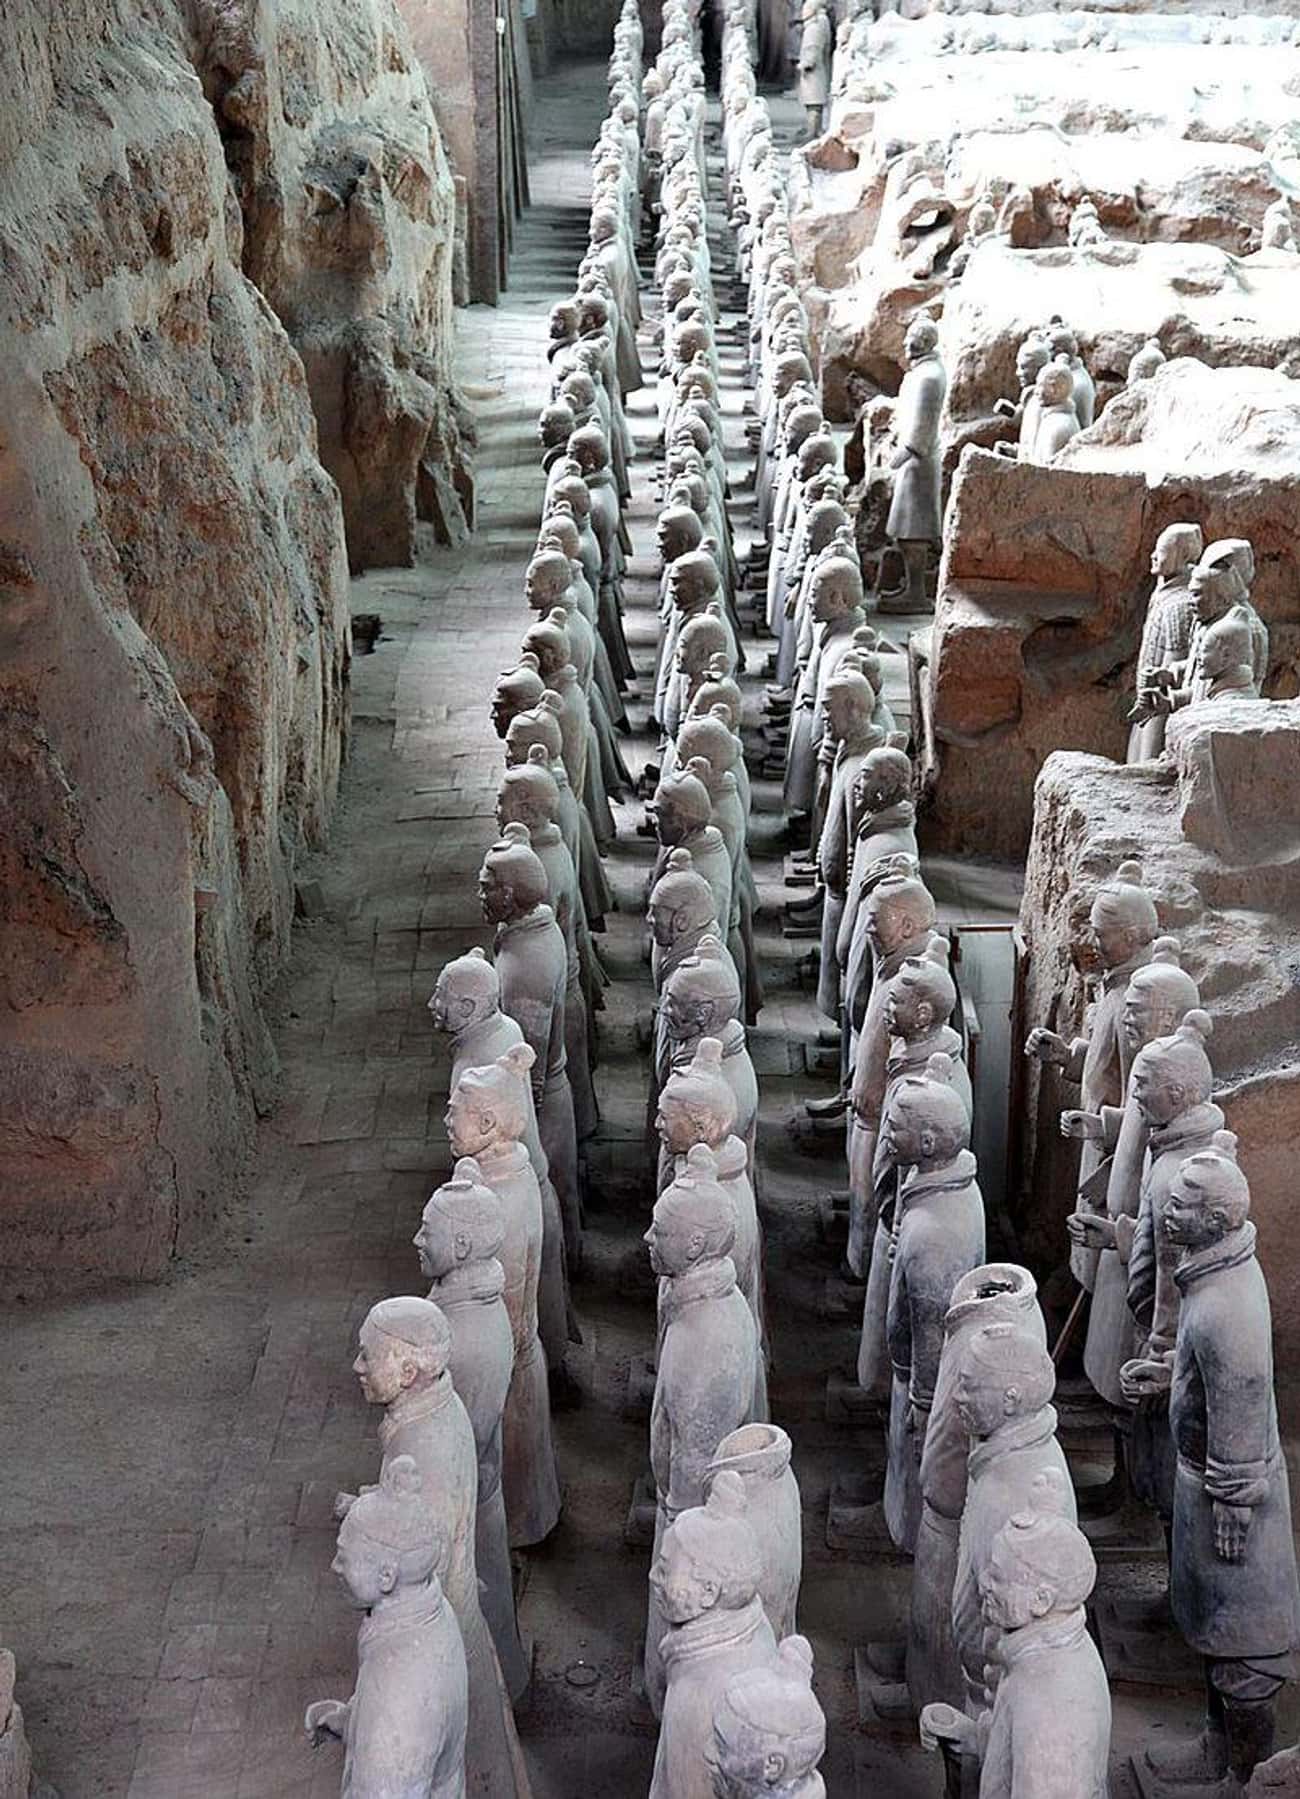 Emperor Qin Shi Huang's Tomb In China Had An Army Of Terracotta Warriors And A Lake Of Mercury